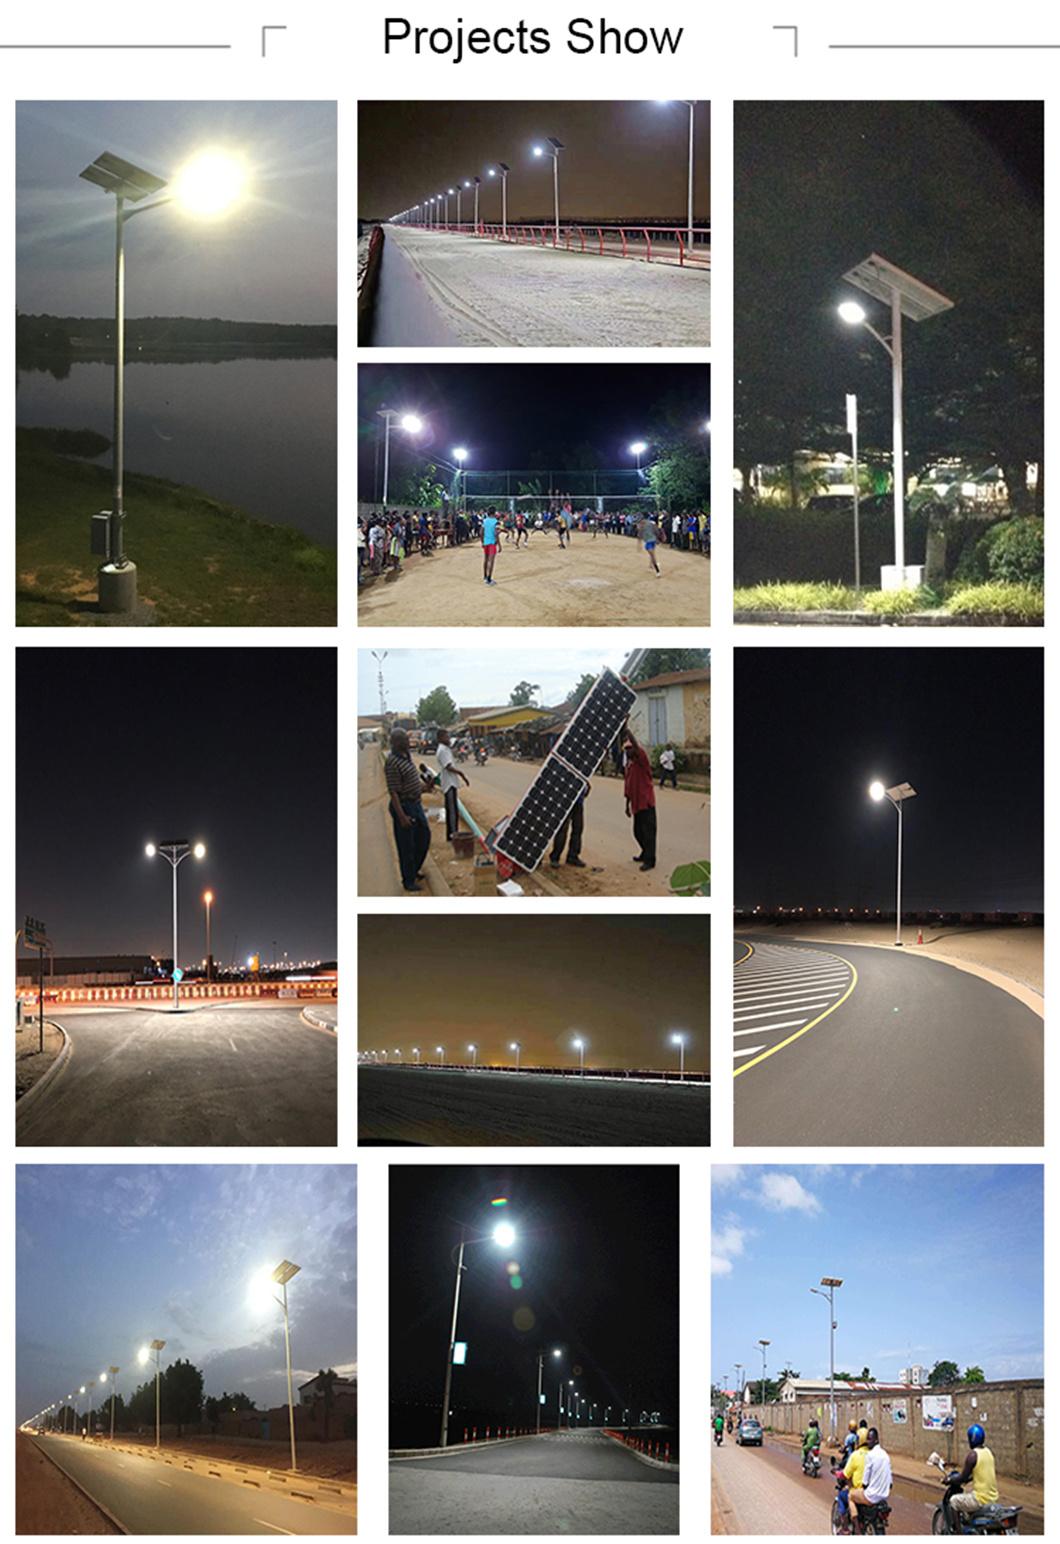 China Supplier Outdoor Waterproof Road Lamp 60W Solar LED Street Light